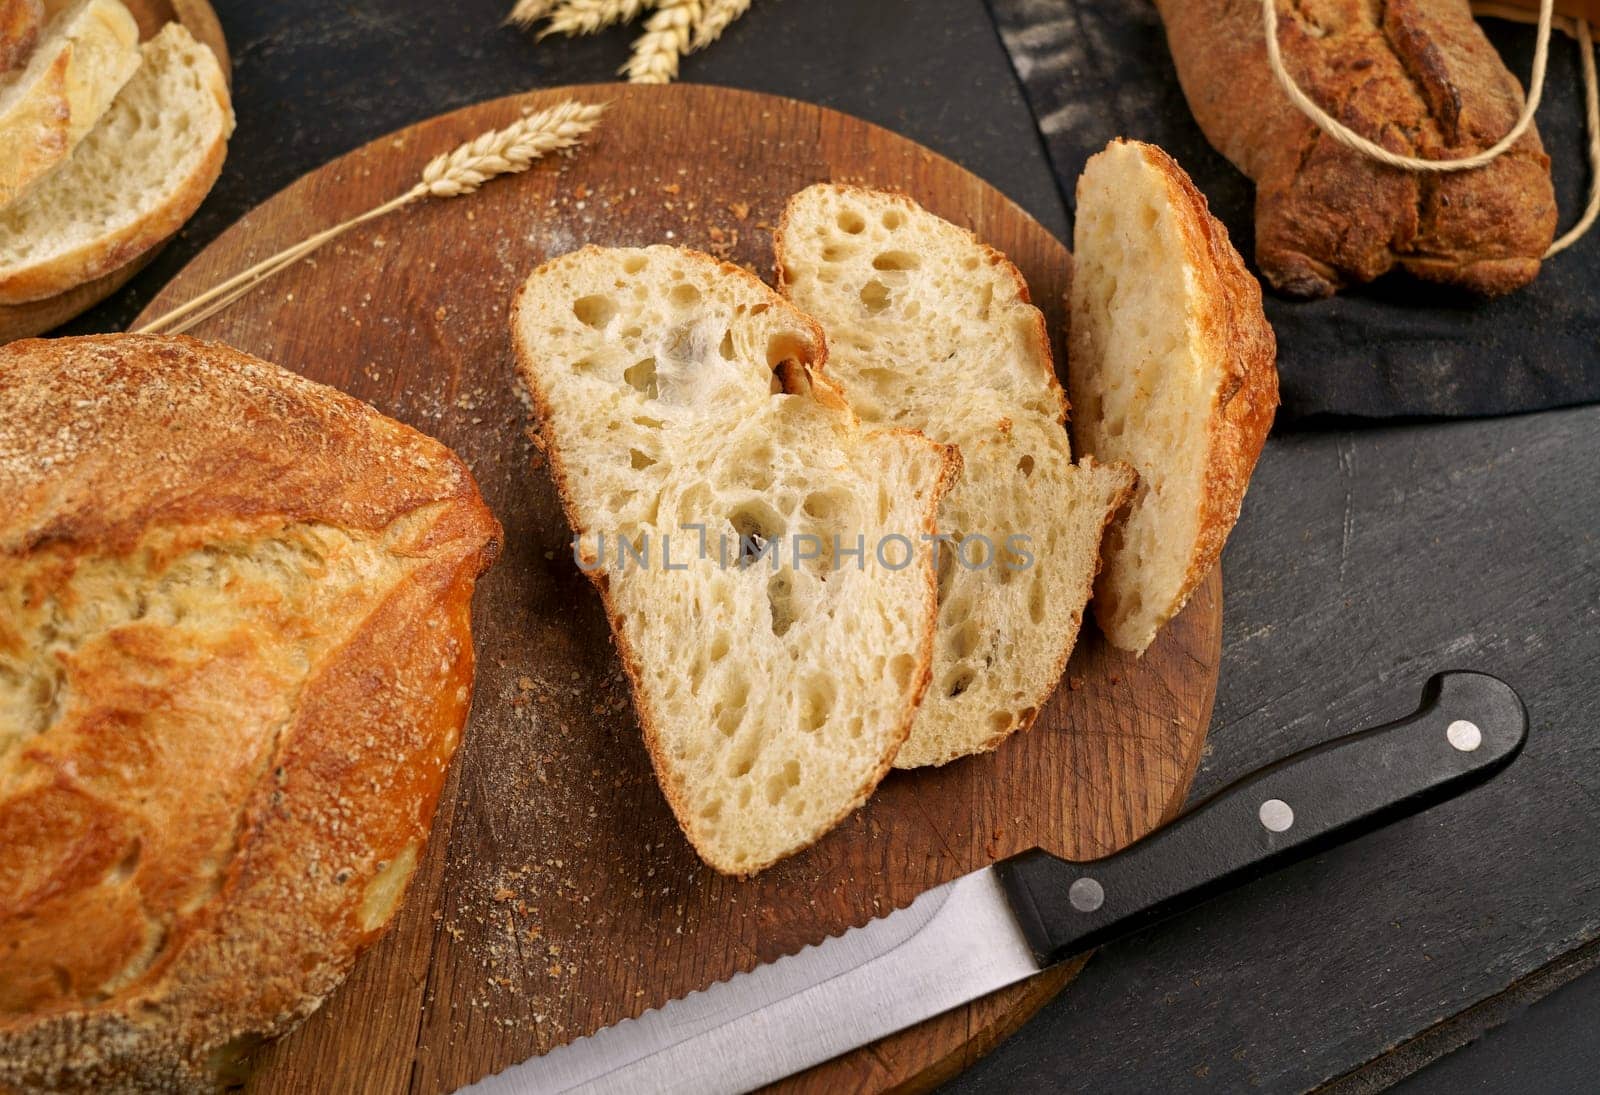 Round loaf of freshly baked sourdough bread with knife on cutting board. Concept of homemade bread, natural farm products, domestic production. Healthy and tasty organic food. Fresh bread slice and cutting knife on rustic table